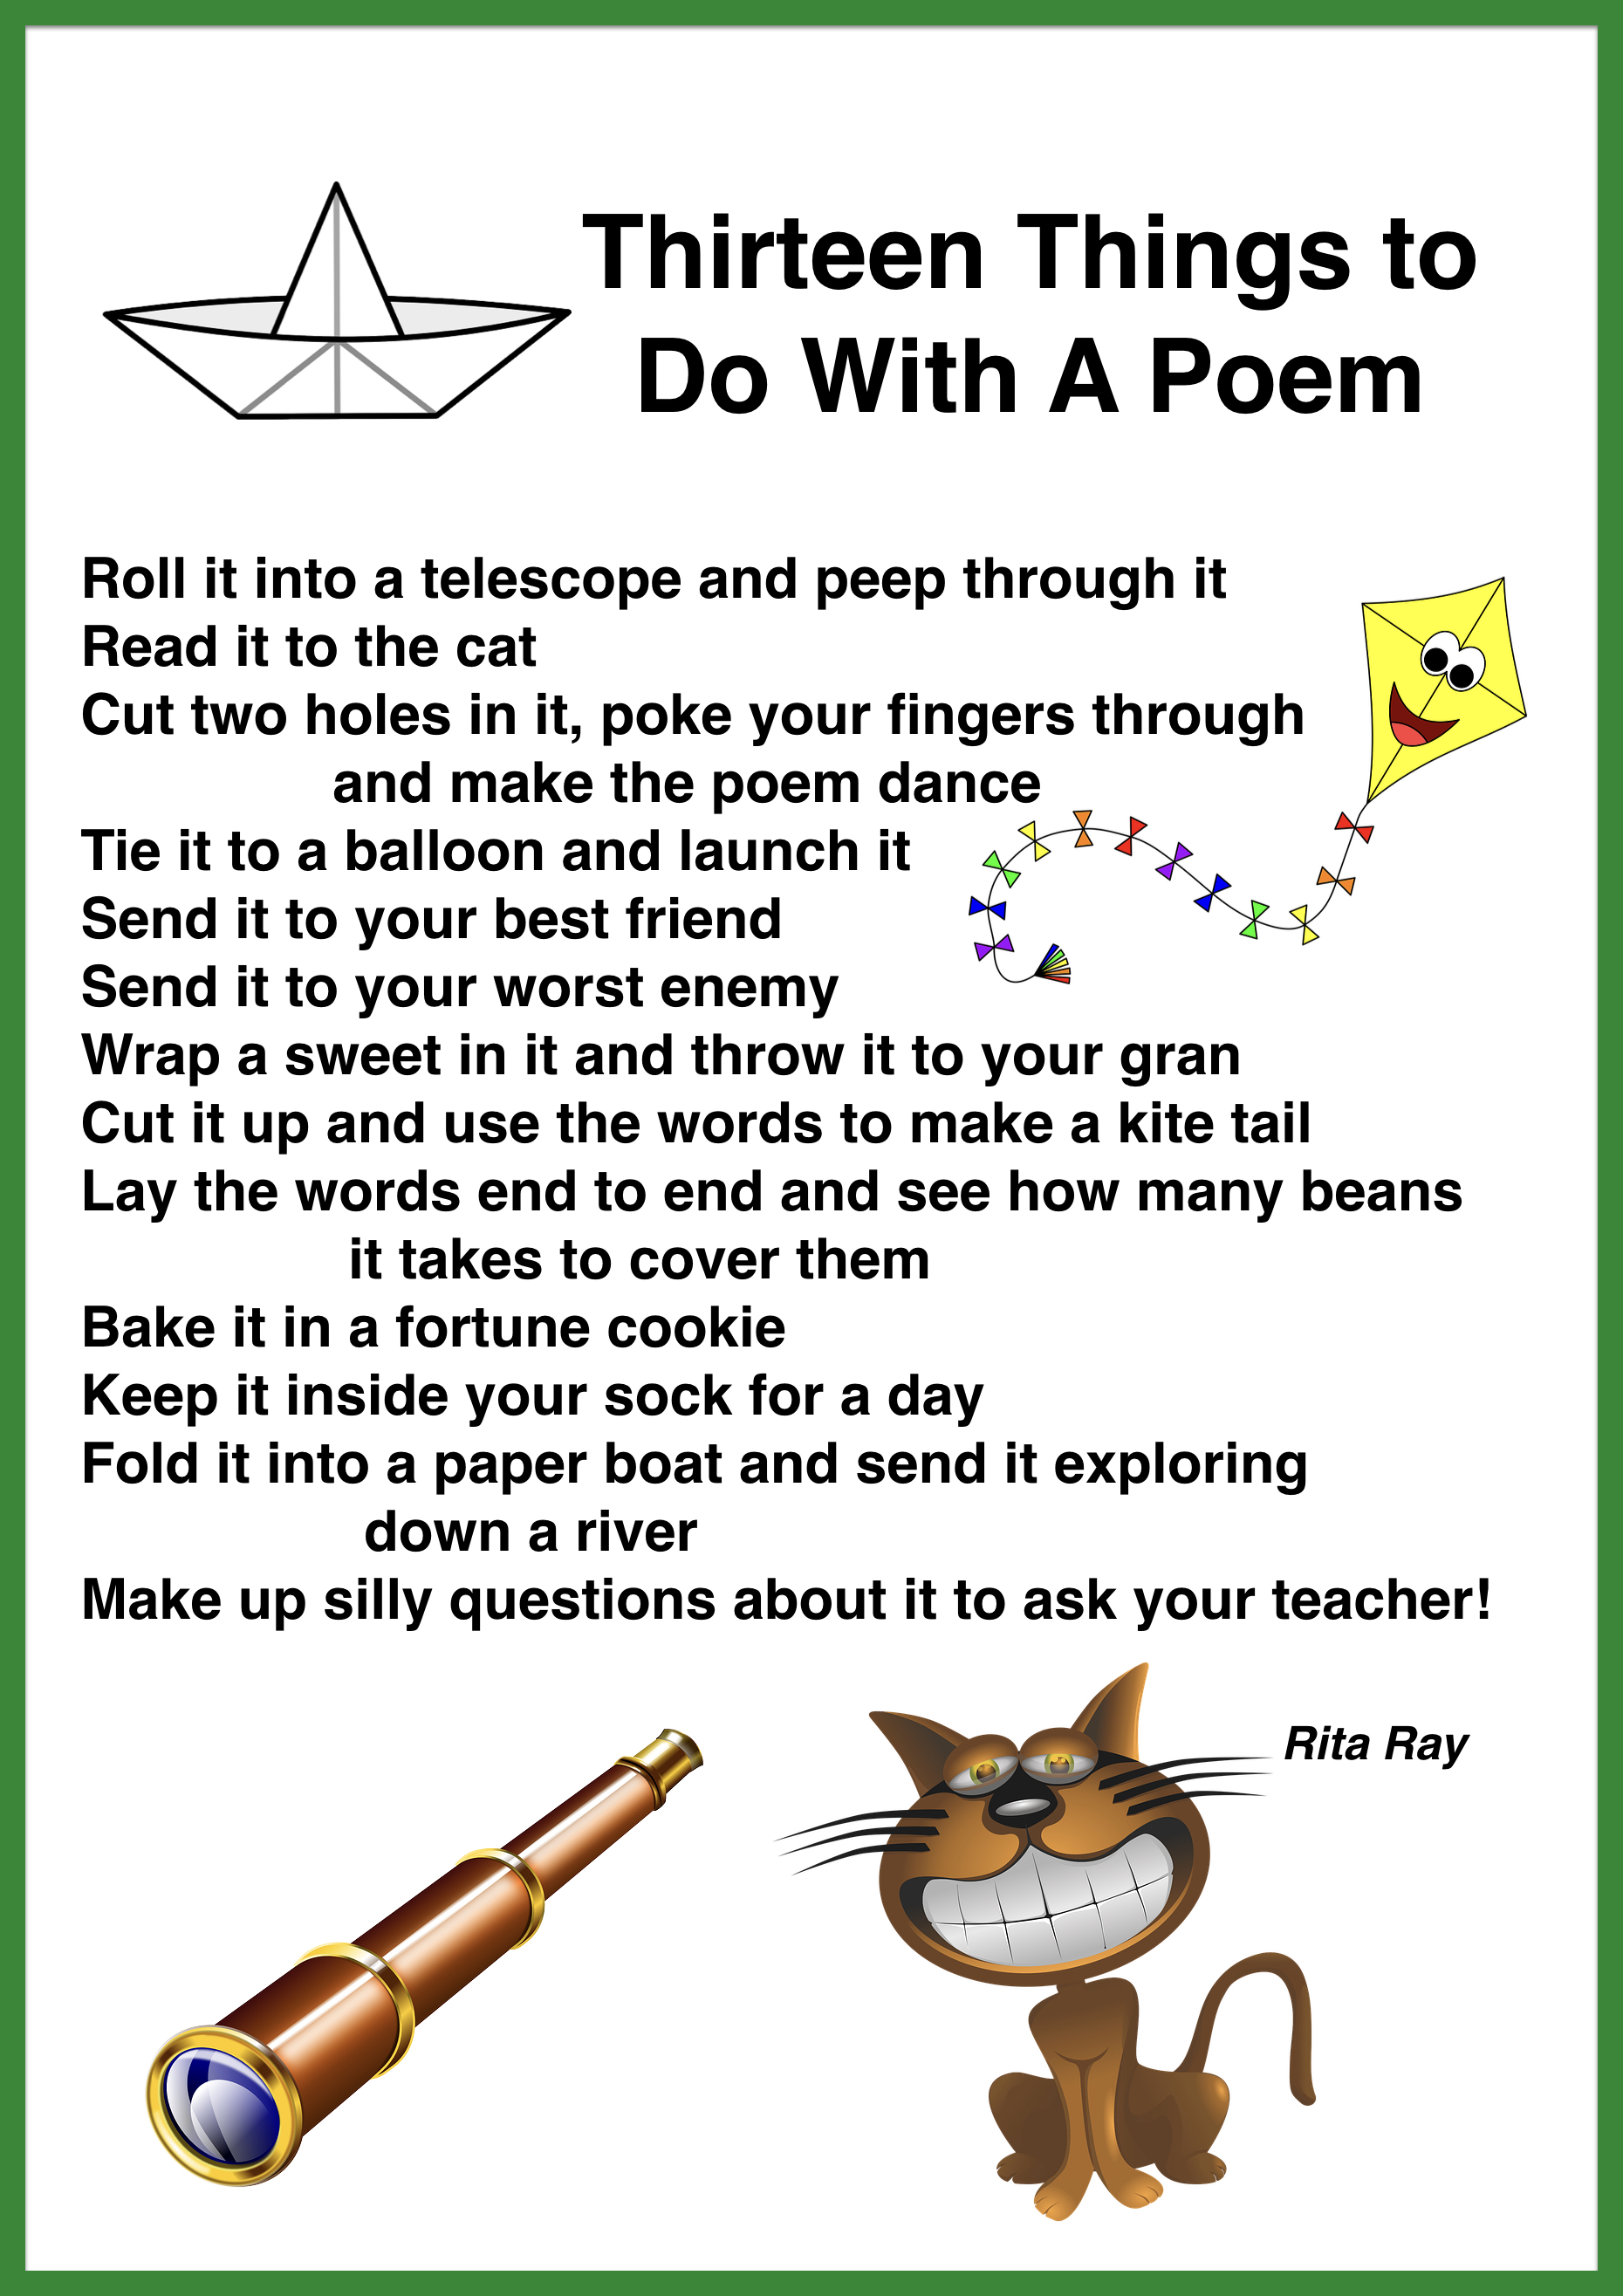 Thirteen Things To Do With A Poem